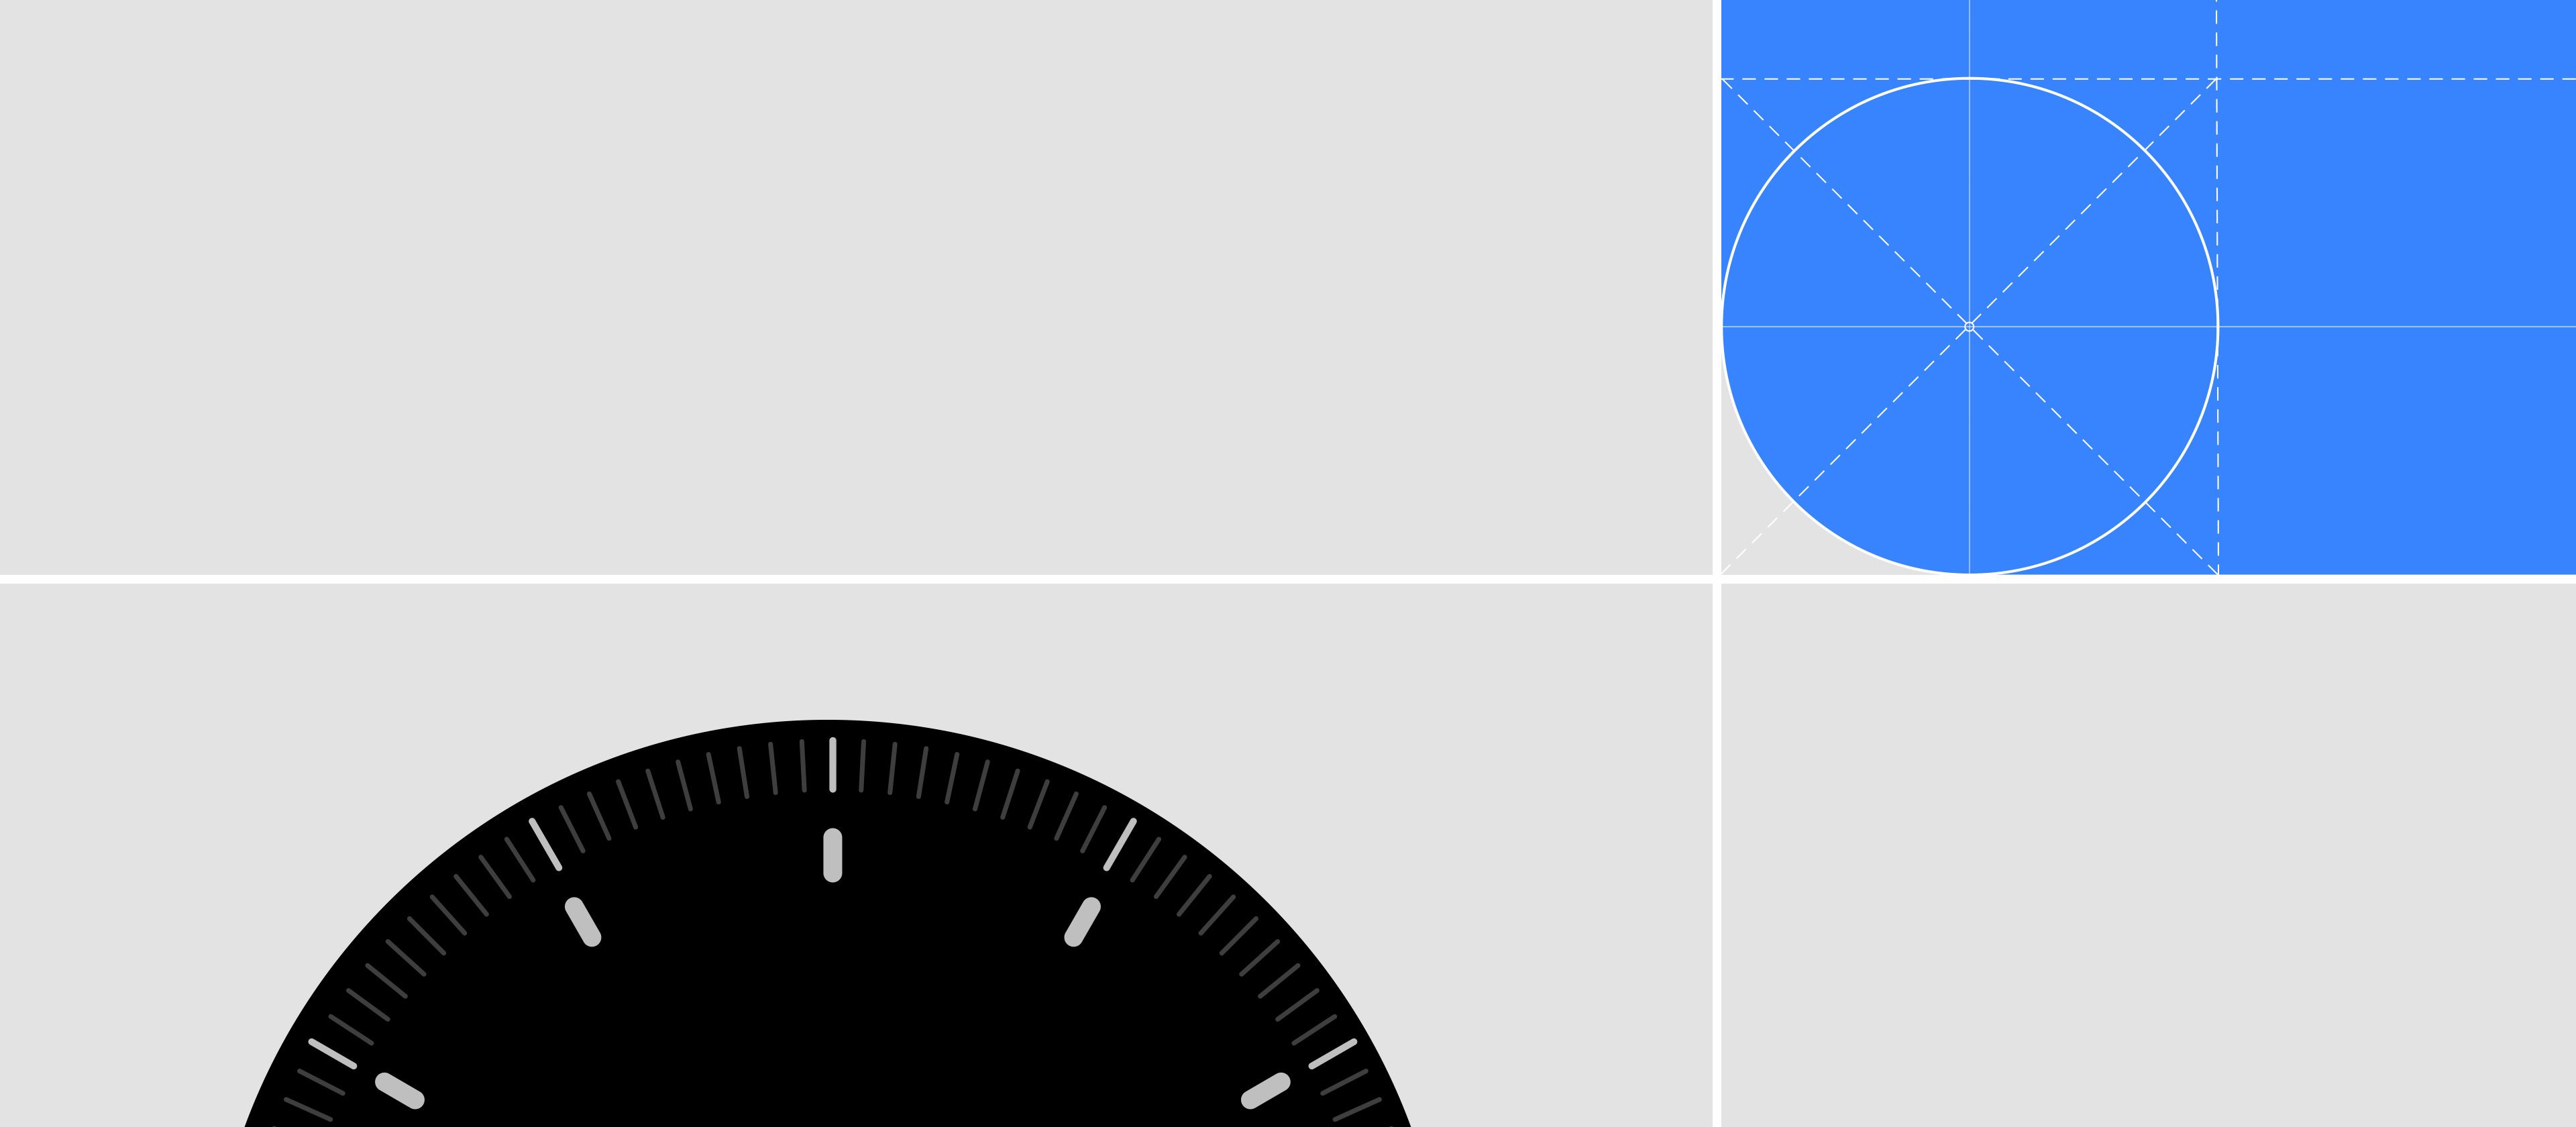 It's a graphic image of a watch face and widget.